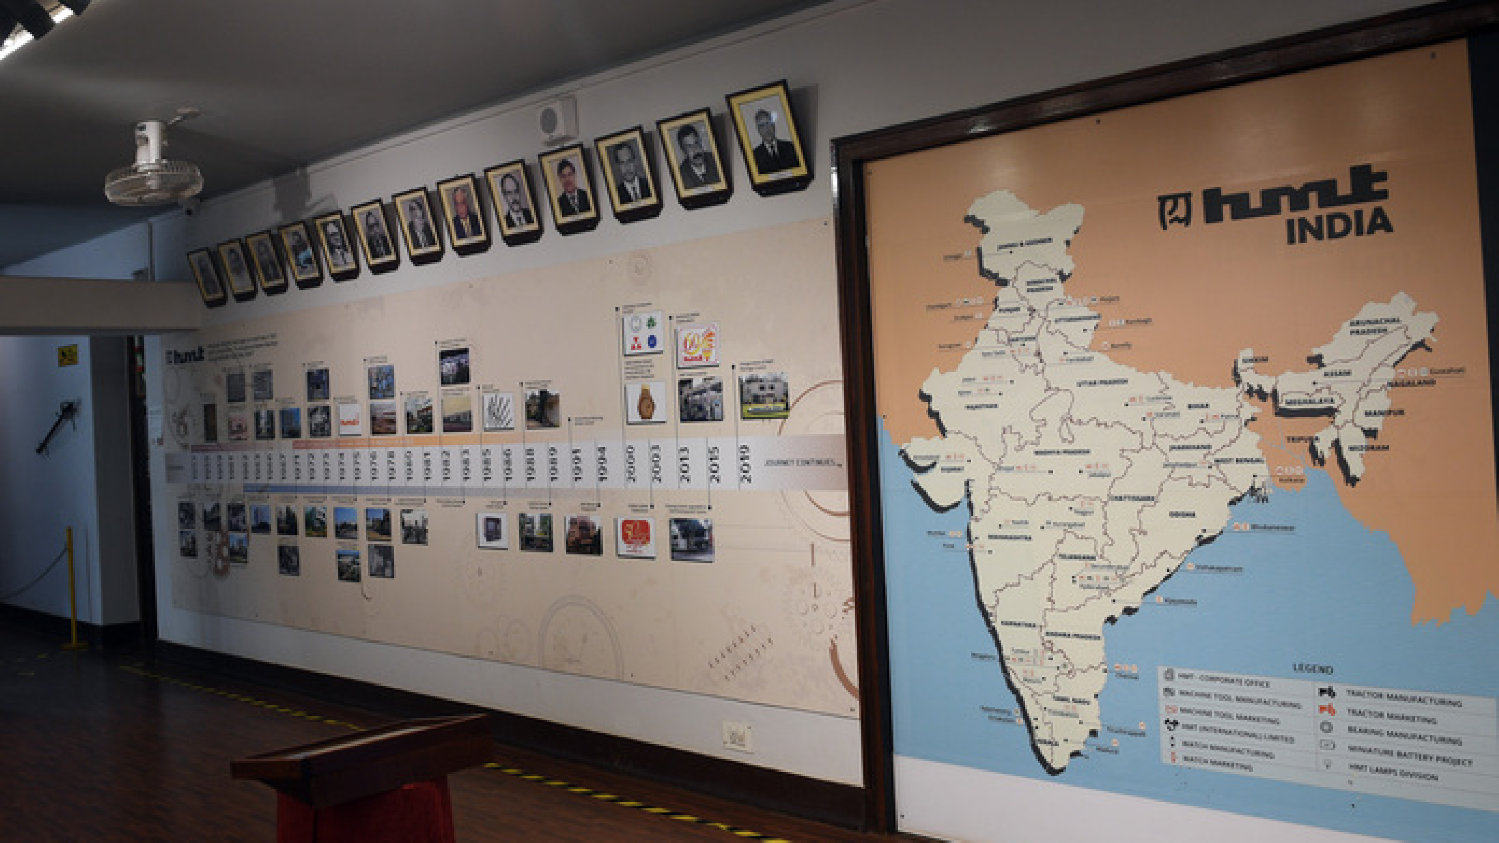 A hall dedicated to show HMT’s exponential growth in India